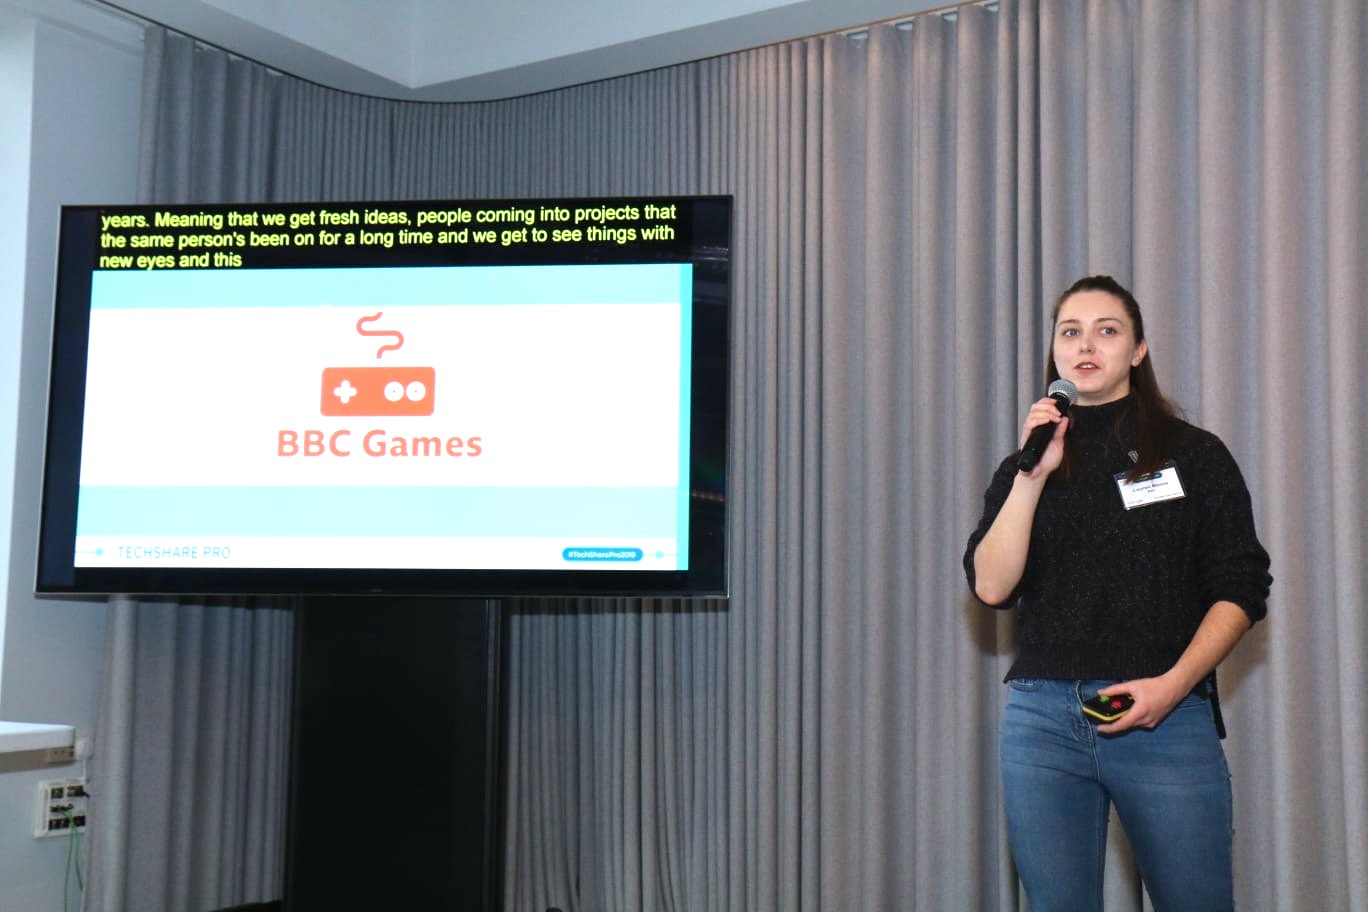 Lauren Moore on stage at TechShare Pro speaking about BBC Games